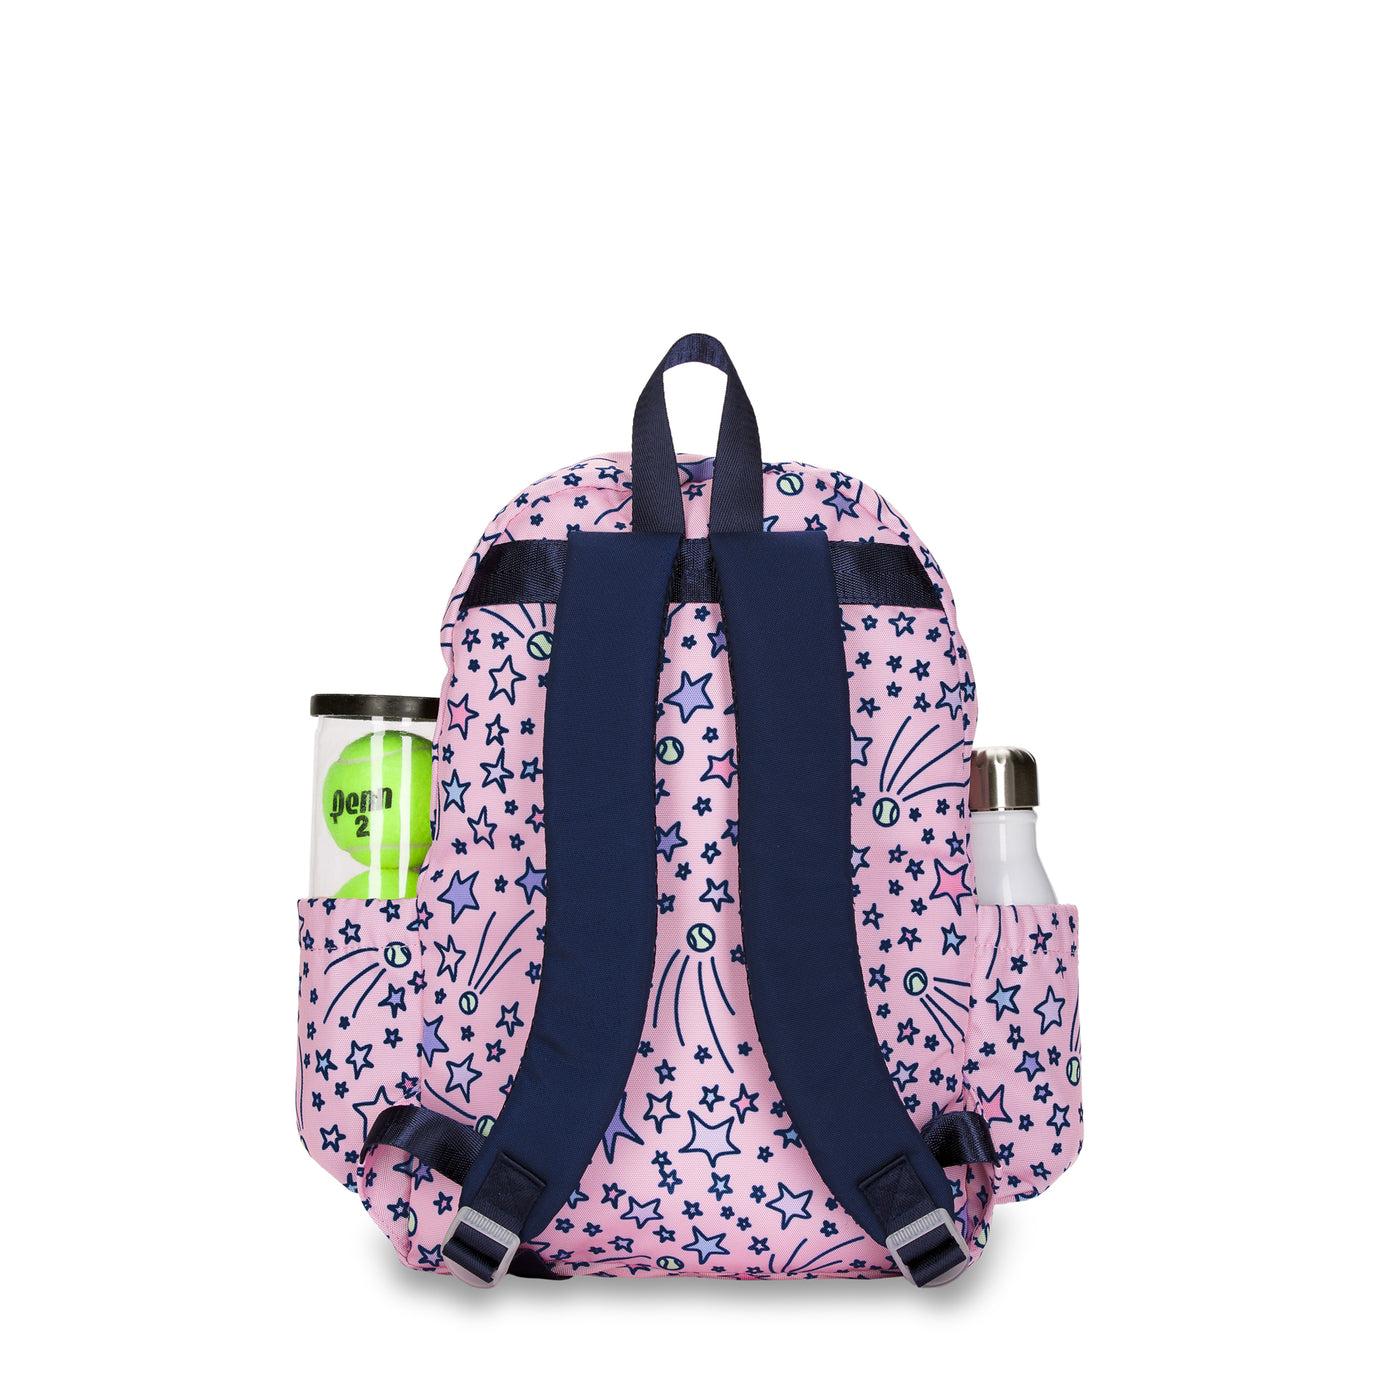 Back view of a light pink kids tennis backpack with pink and purple shooting stars and tennis balls on bag.